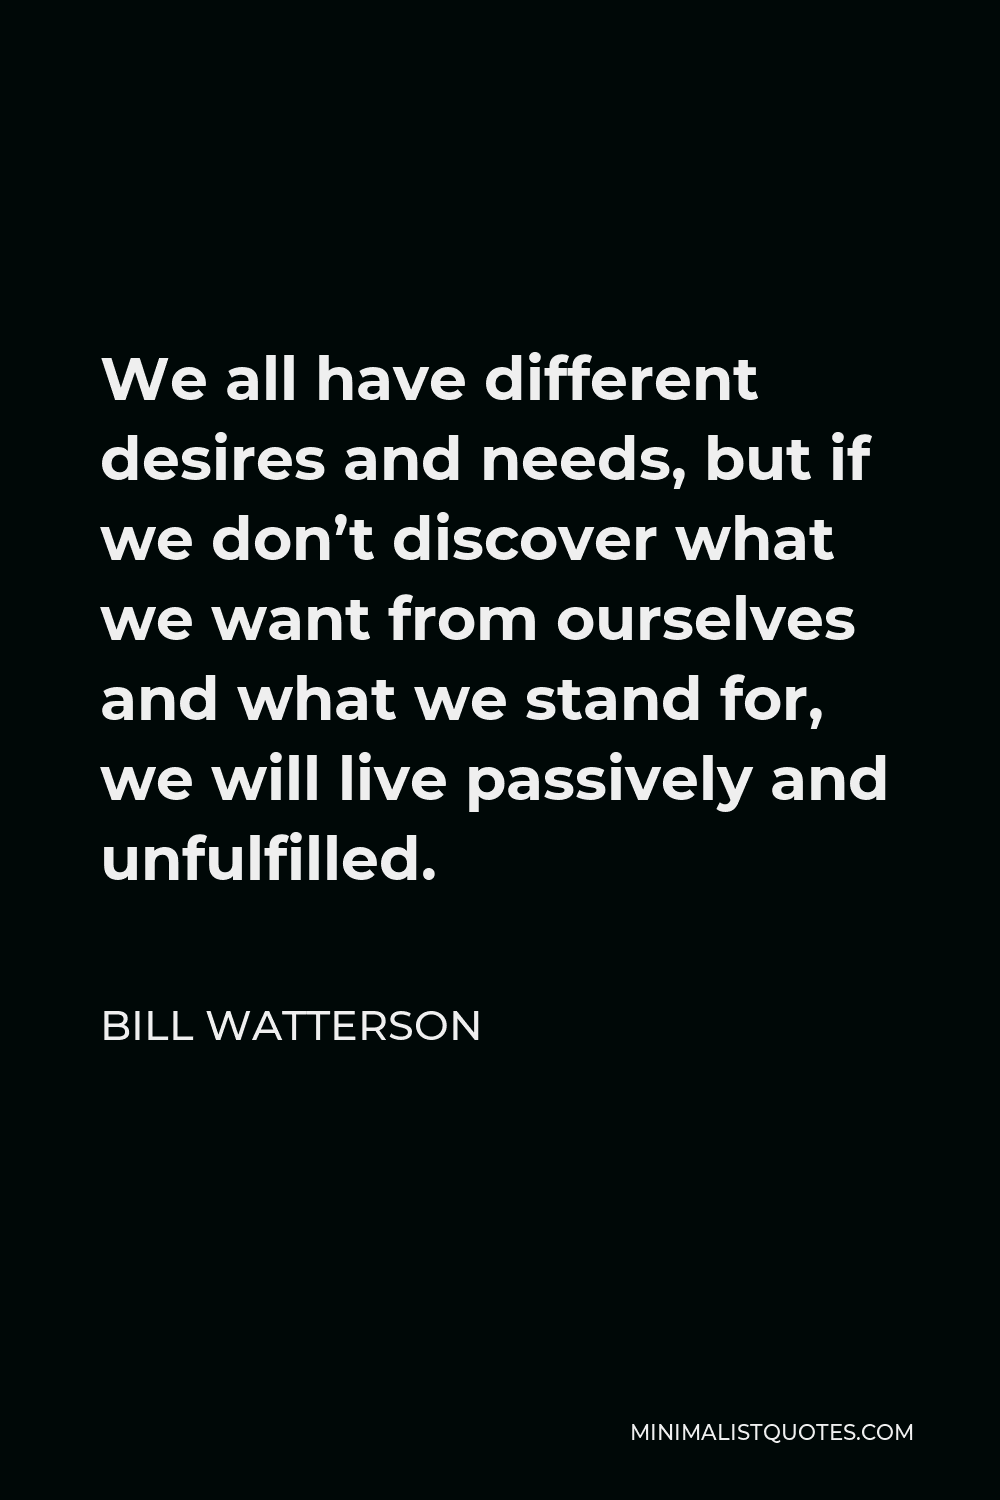 Bill Watterson Quote - We all have different desires and needs, but if we don’t discover what we want from ourselves and what we stand for, we will live passively and unfulfilled.